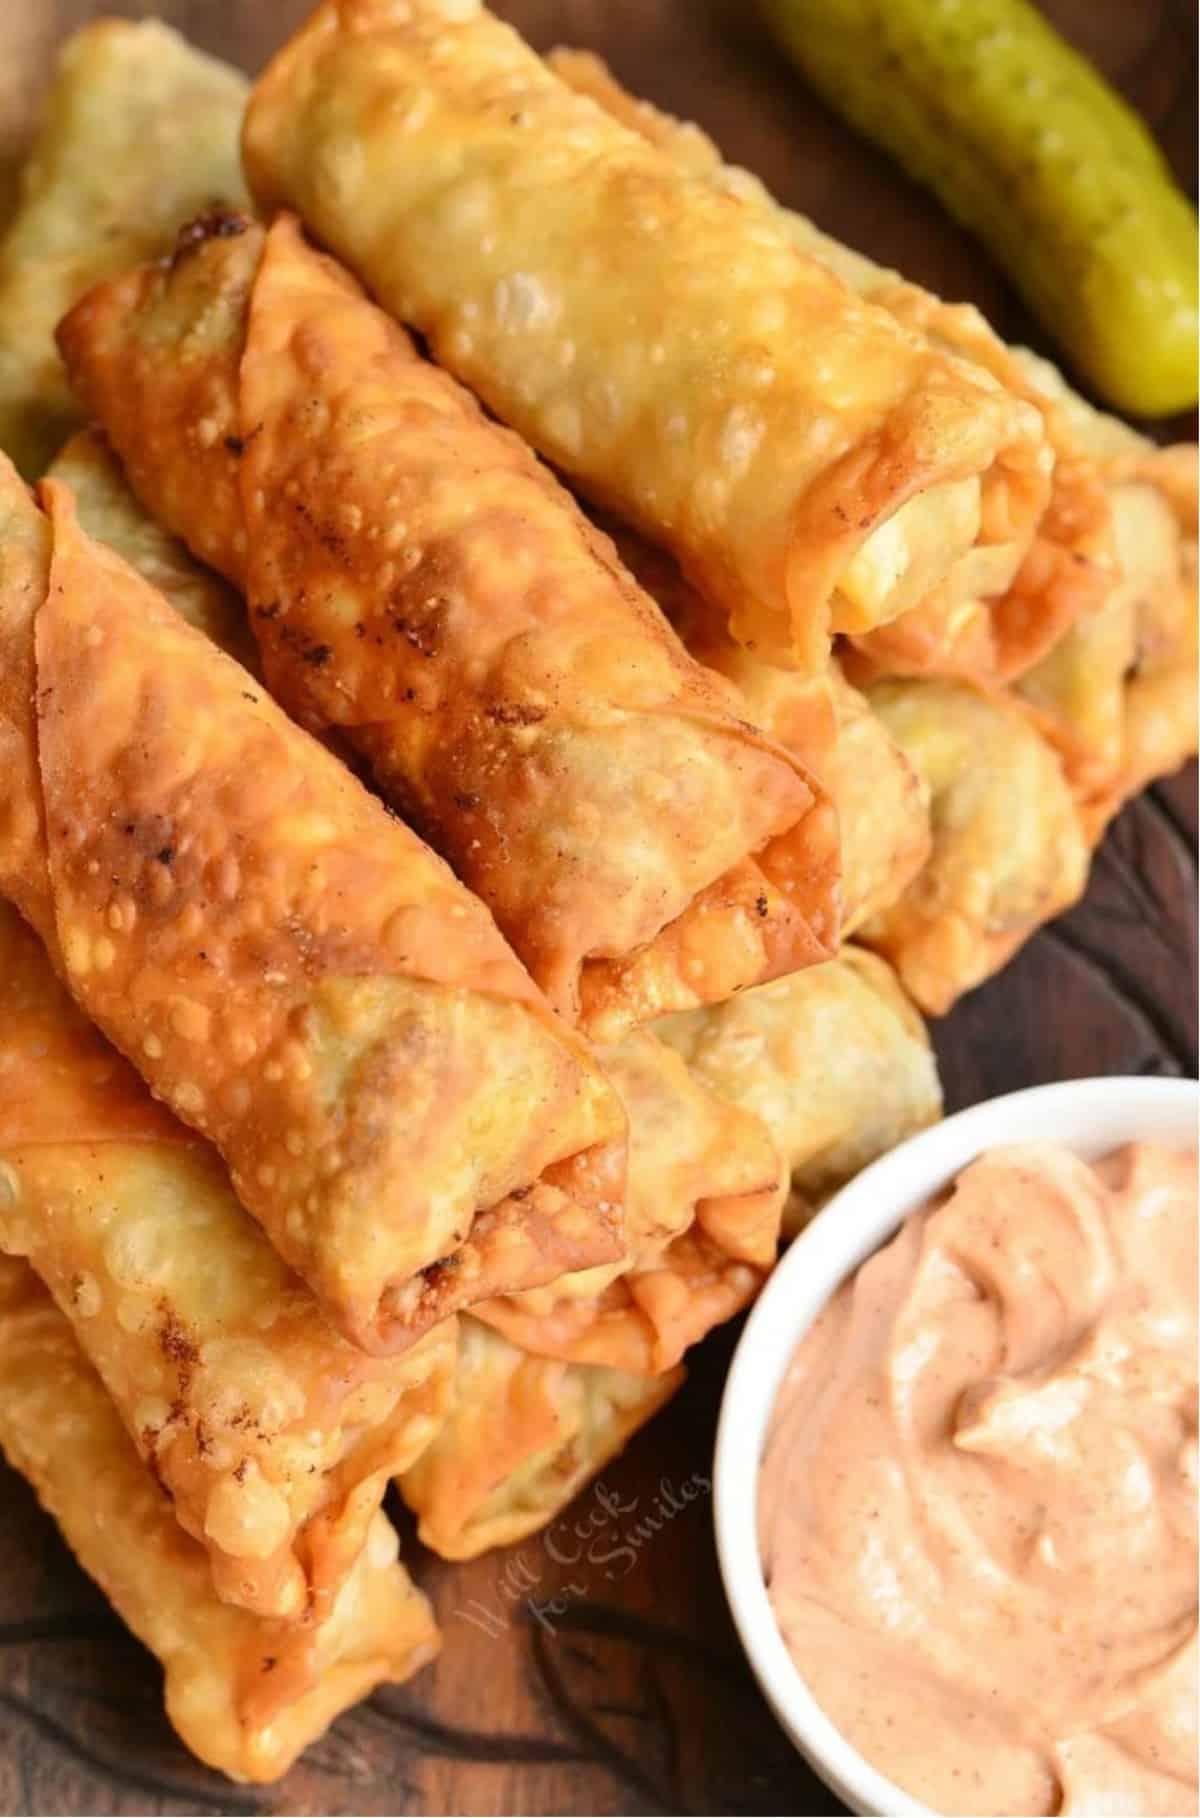 fried cheeseburger egg rolls stacked next to a dip.